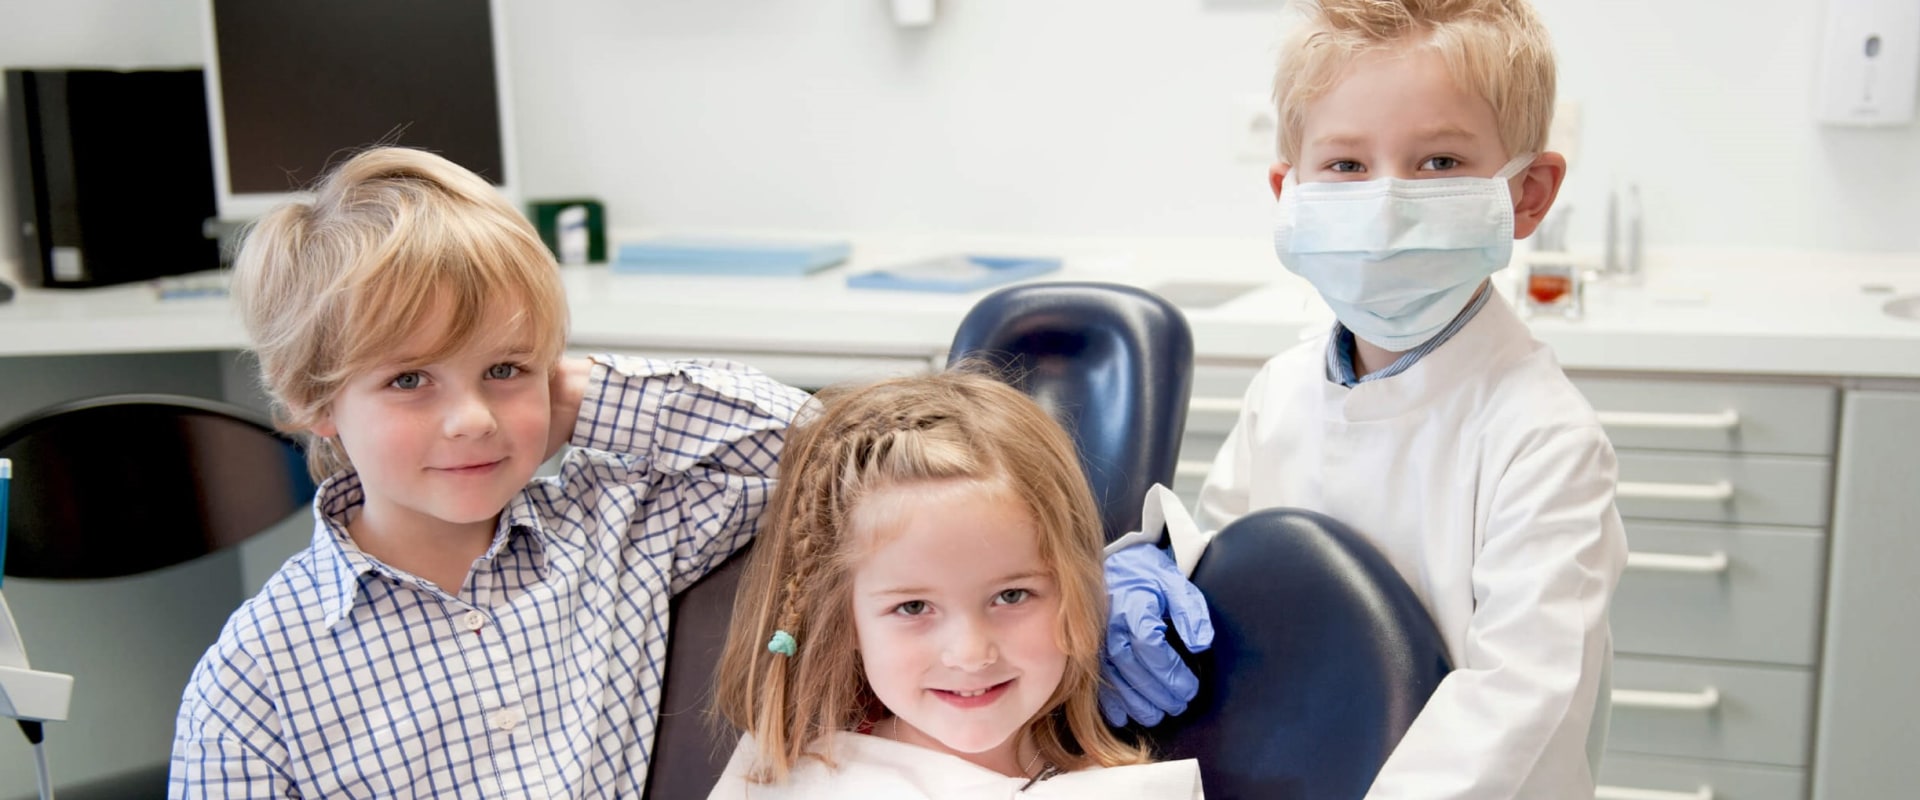 When is the Best Time to Visit the Dentist?